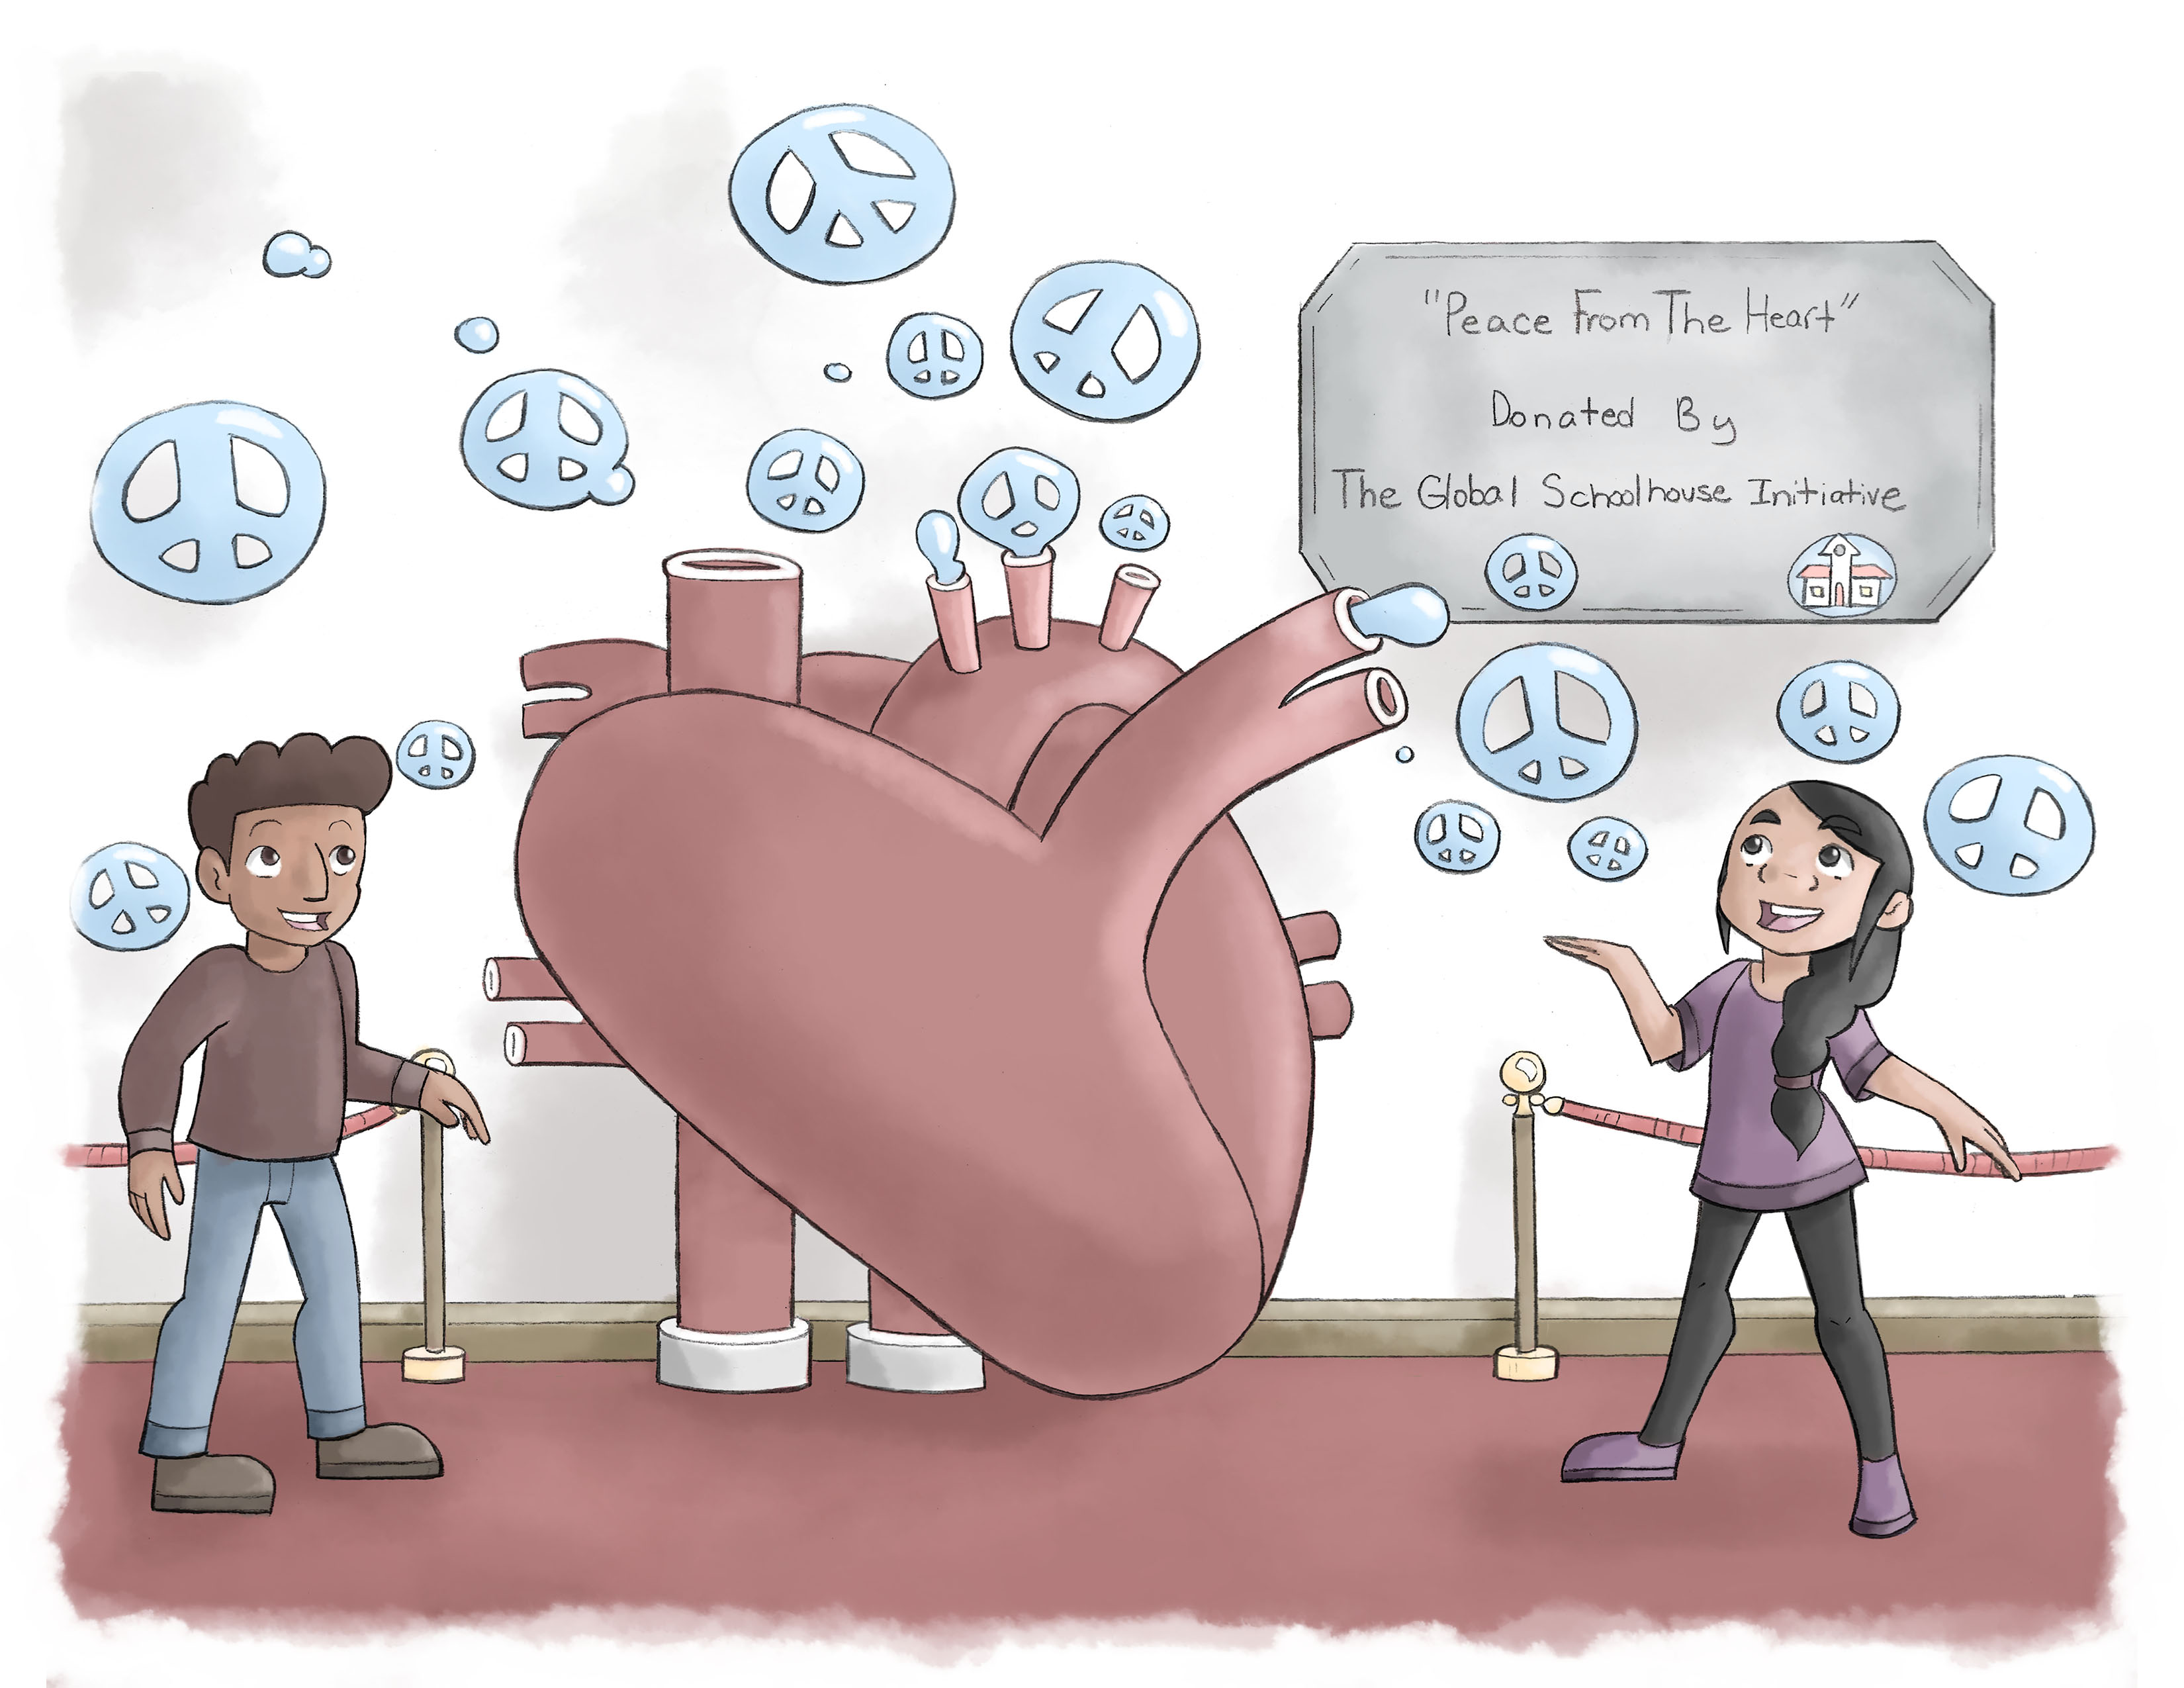 The issue, cartoon two children, heart beating peace signs